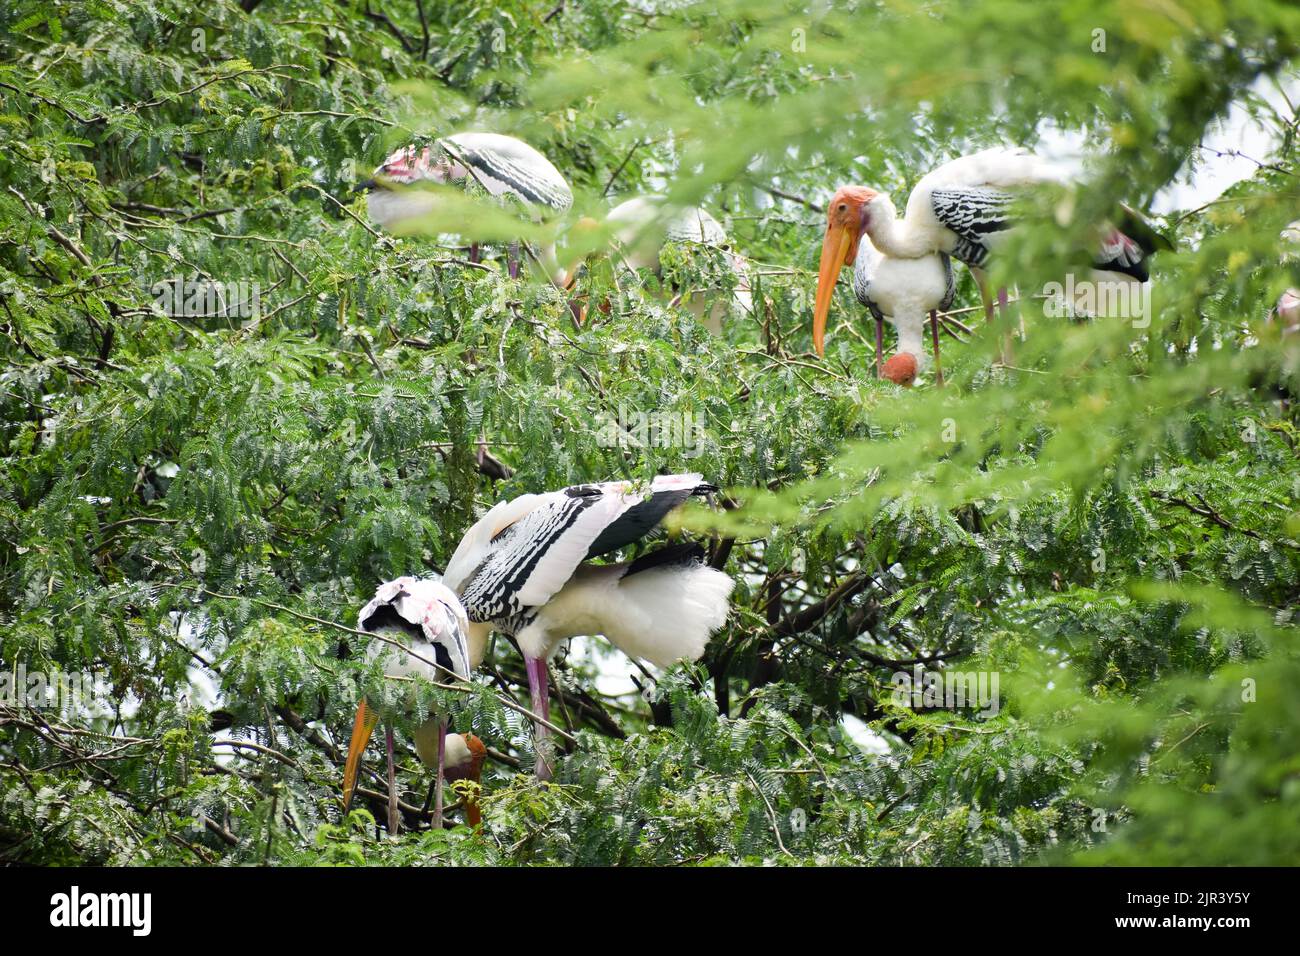 Flock of Painted storks which are migratory bird are taking rest at New Delhi zoo in India Stock Photo